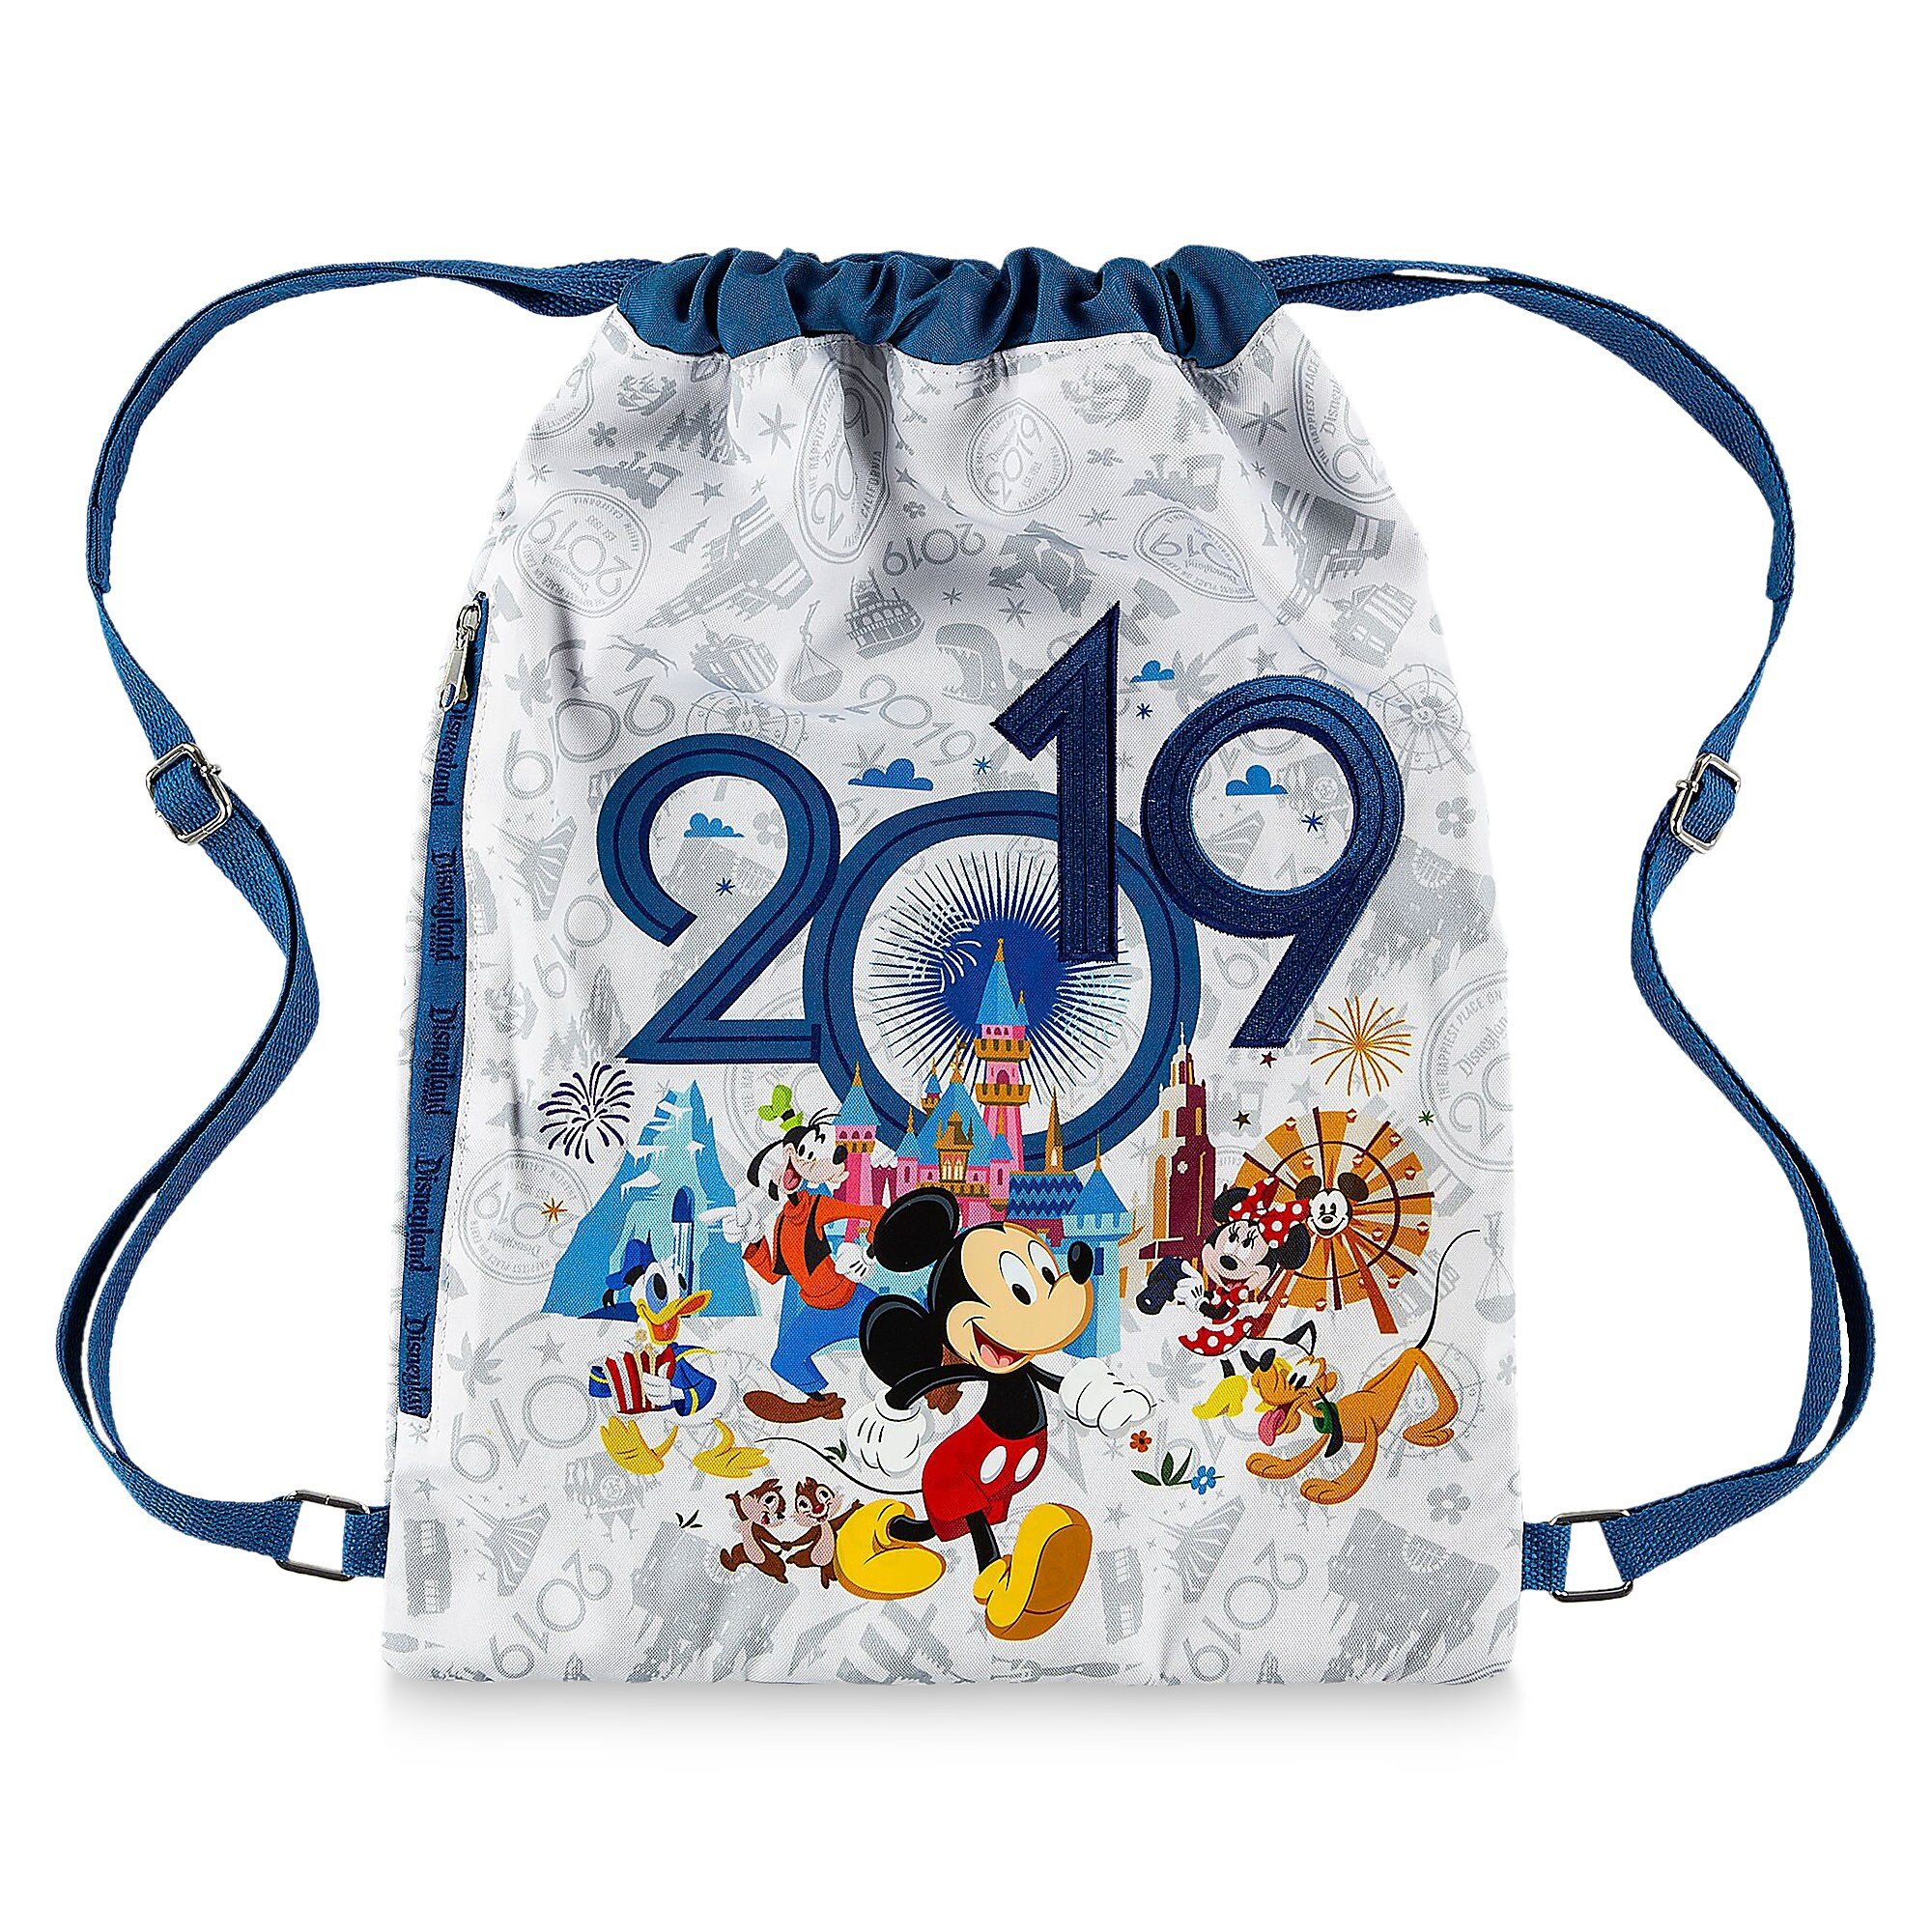 Mickey Mouse and Friends Cinch Sack - Disneyland 2019